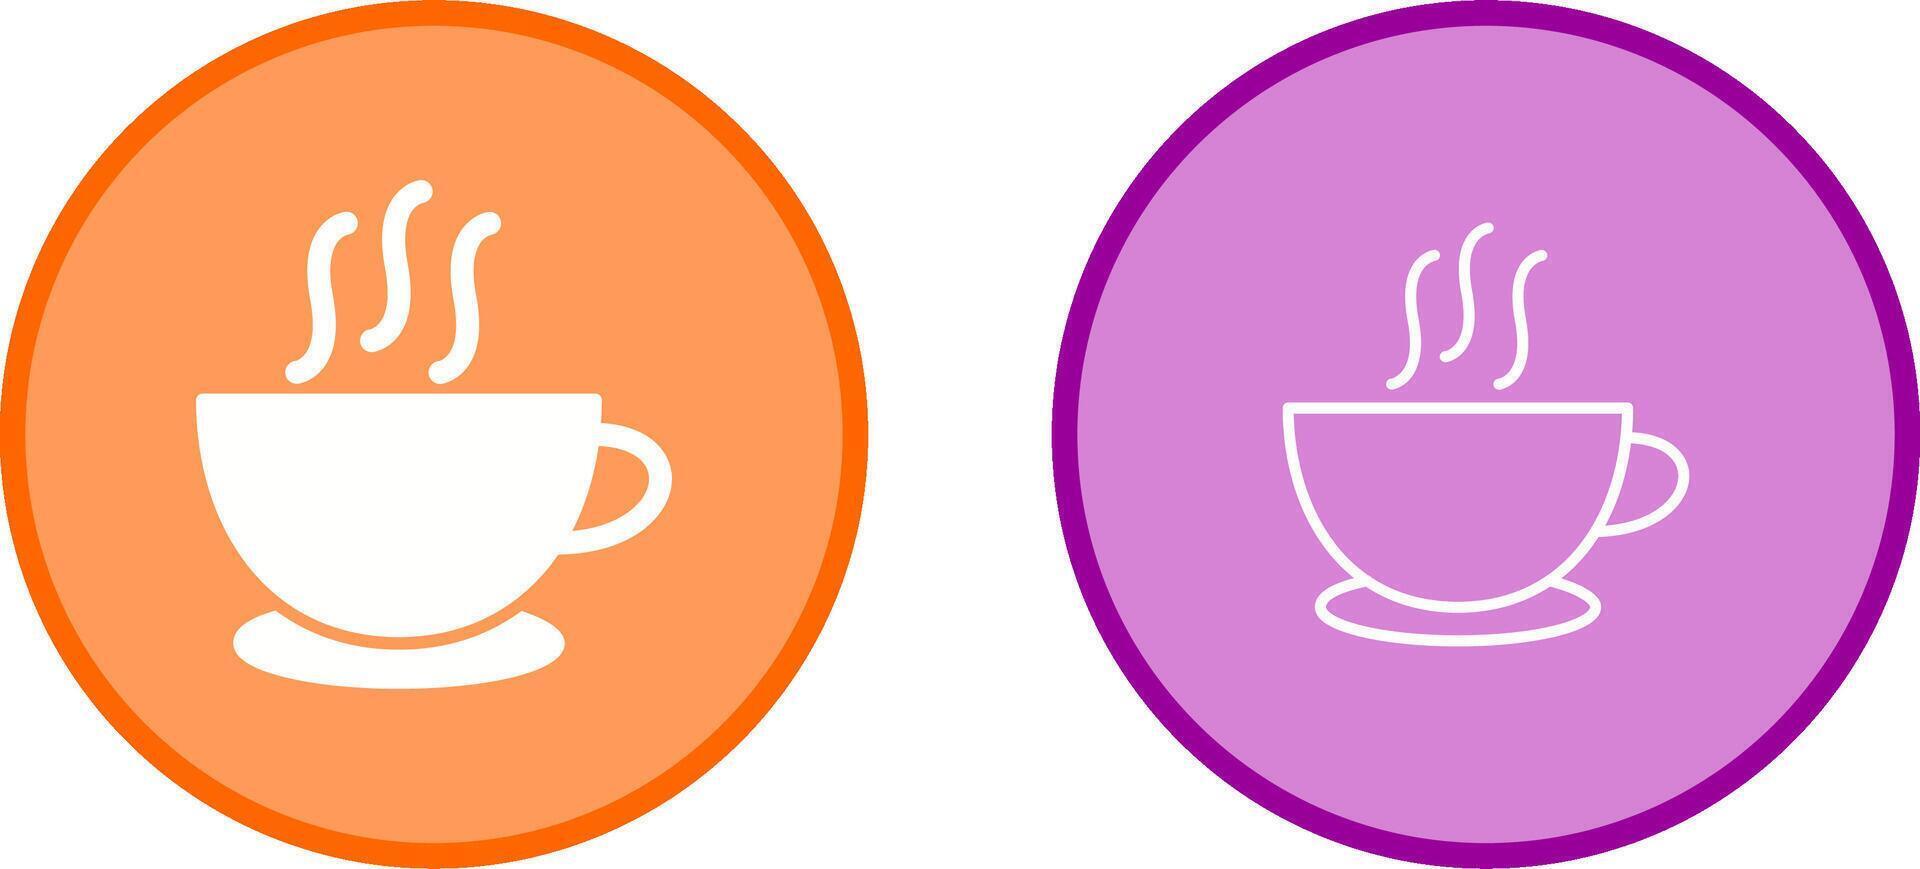 Coffee Cup I Vector Icon